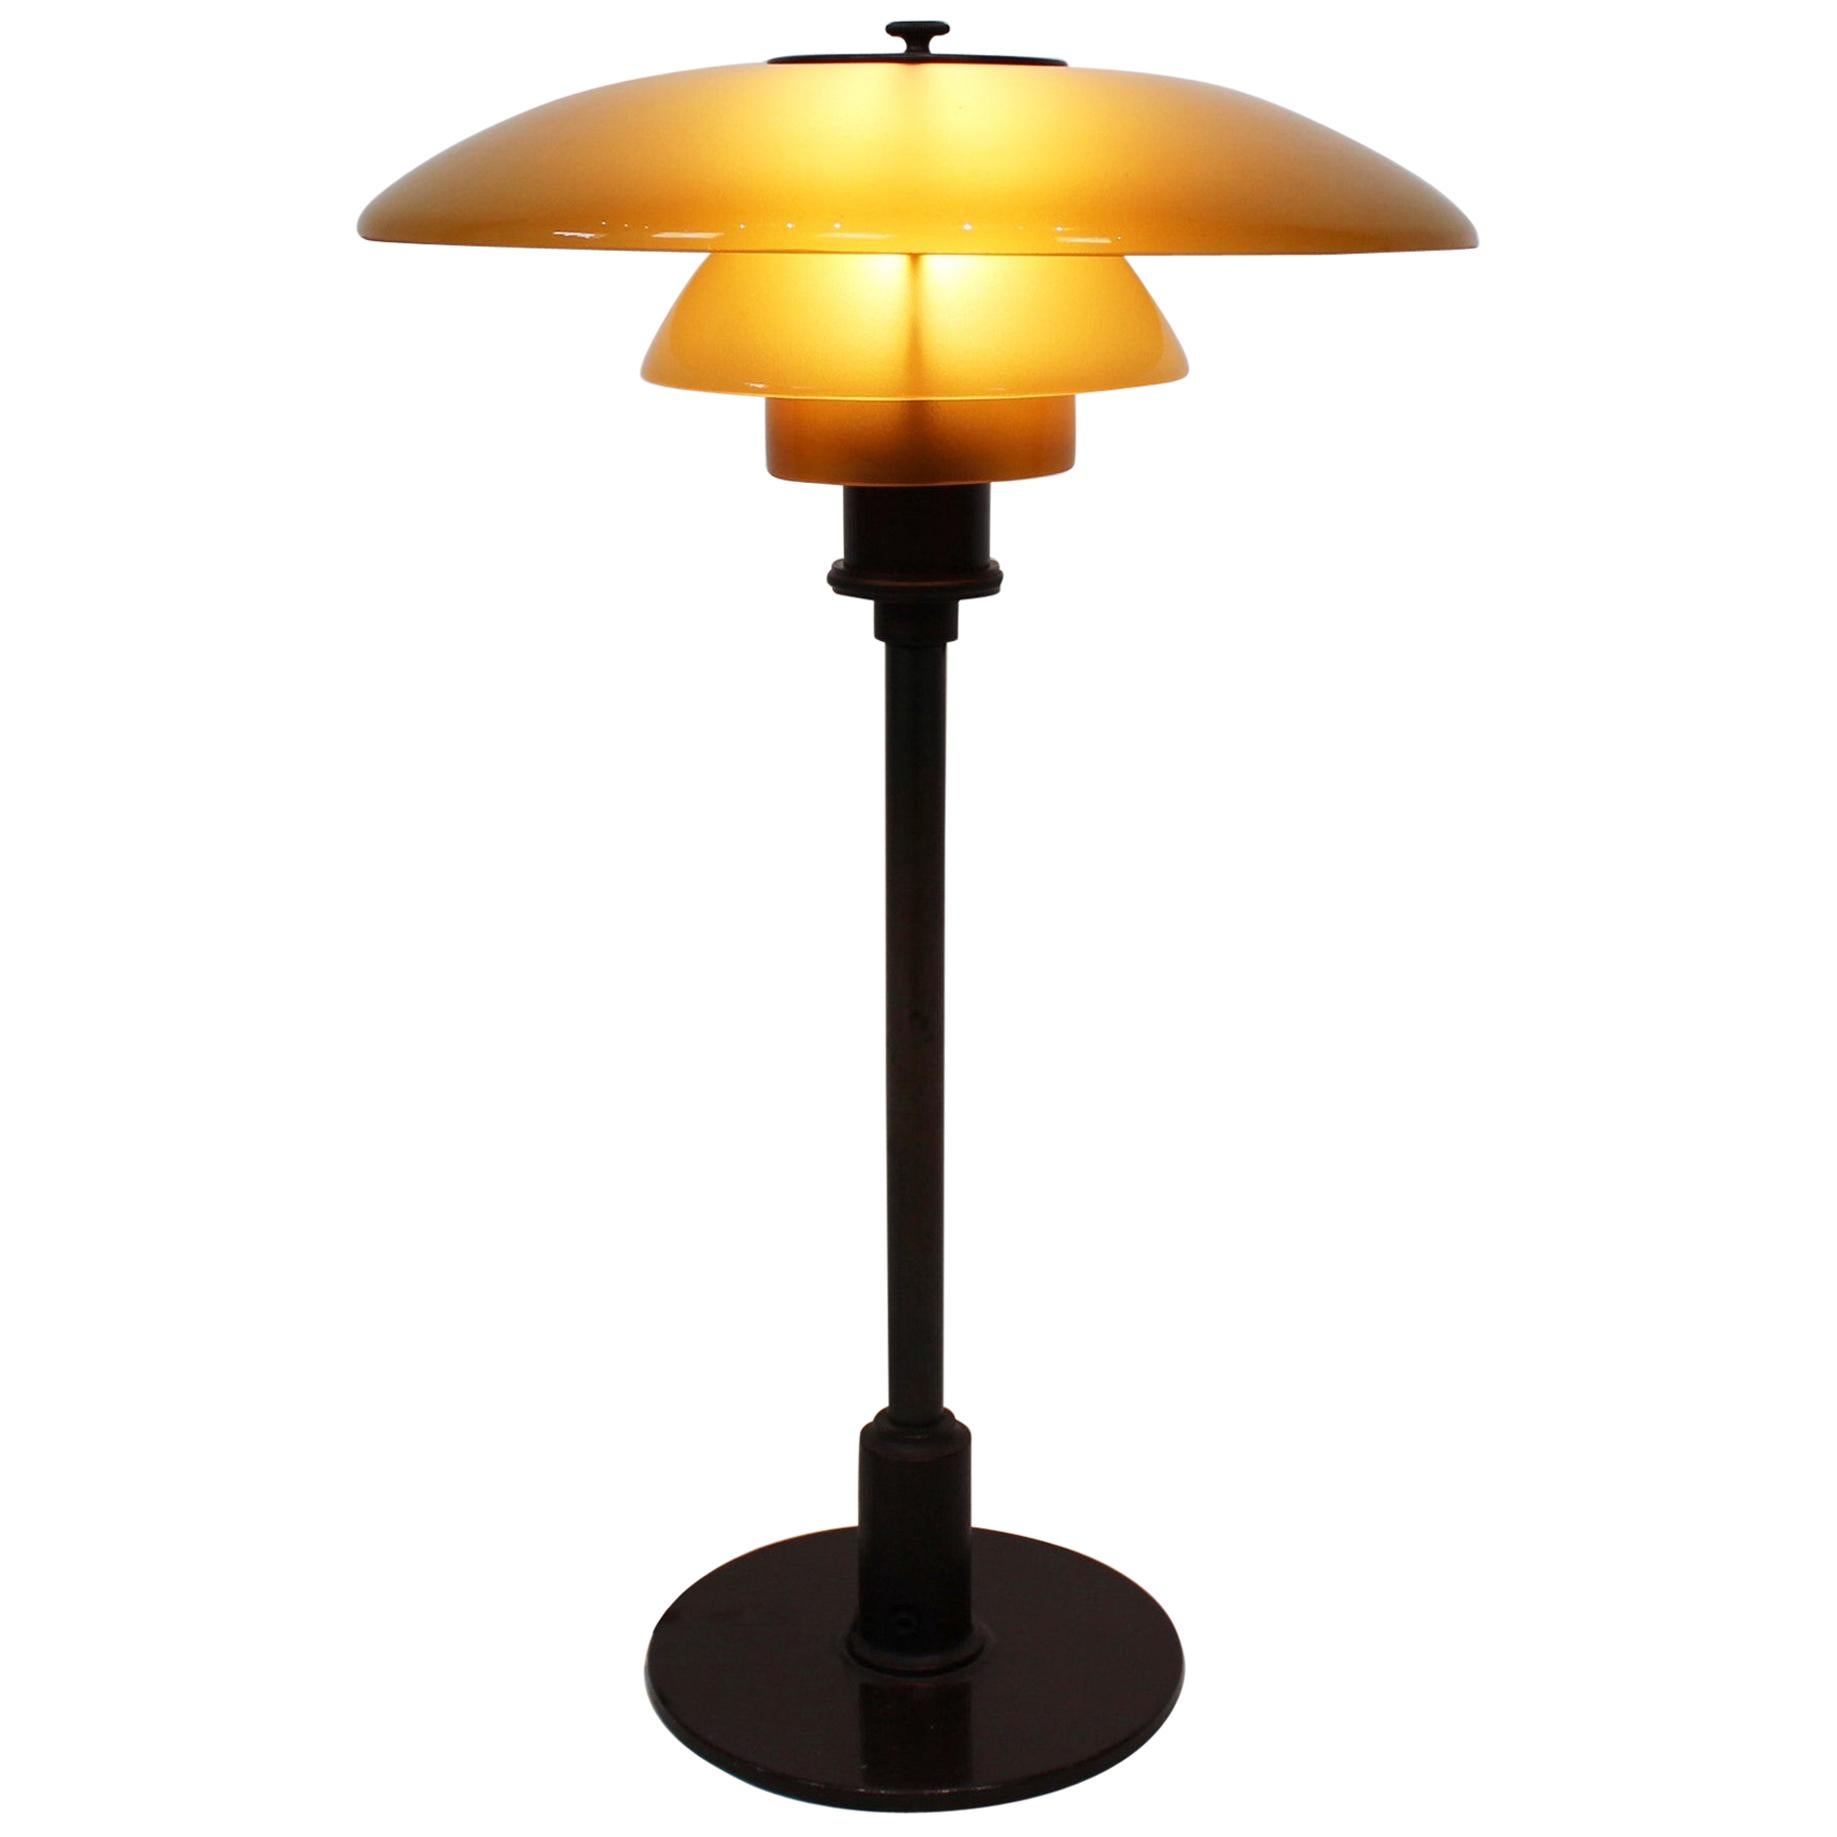 PH 3/2 Tablelamp with Shades of Amber Colored Glass, 1930s